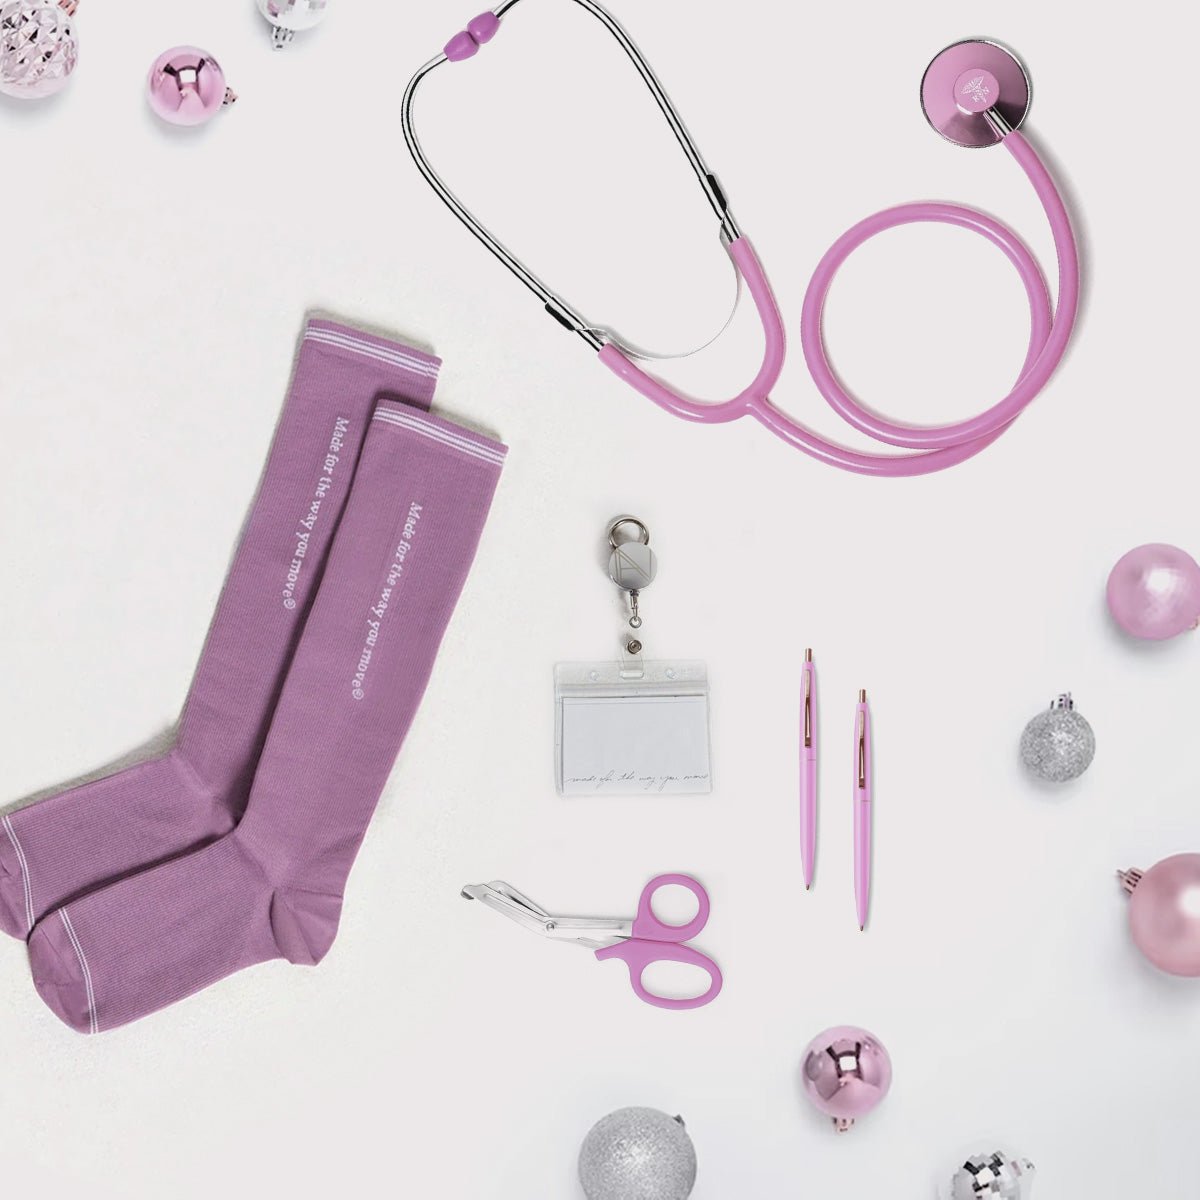 The 10 Best Gifts for the Nurses in Your Life This Holiday Season